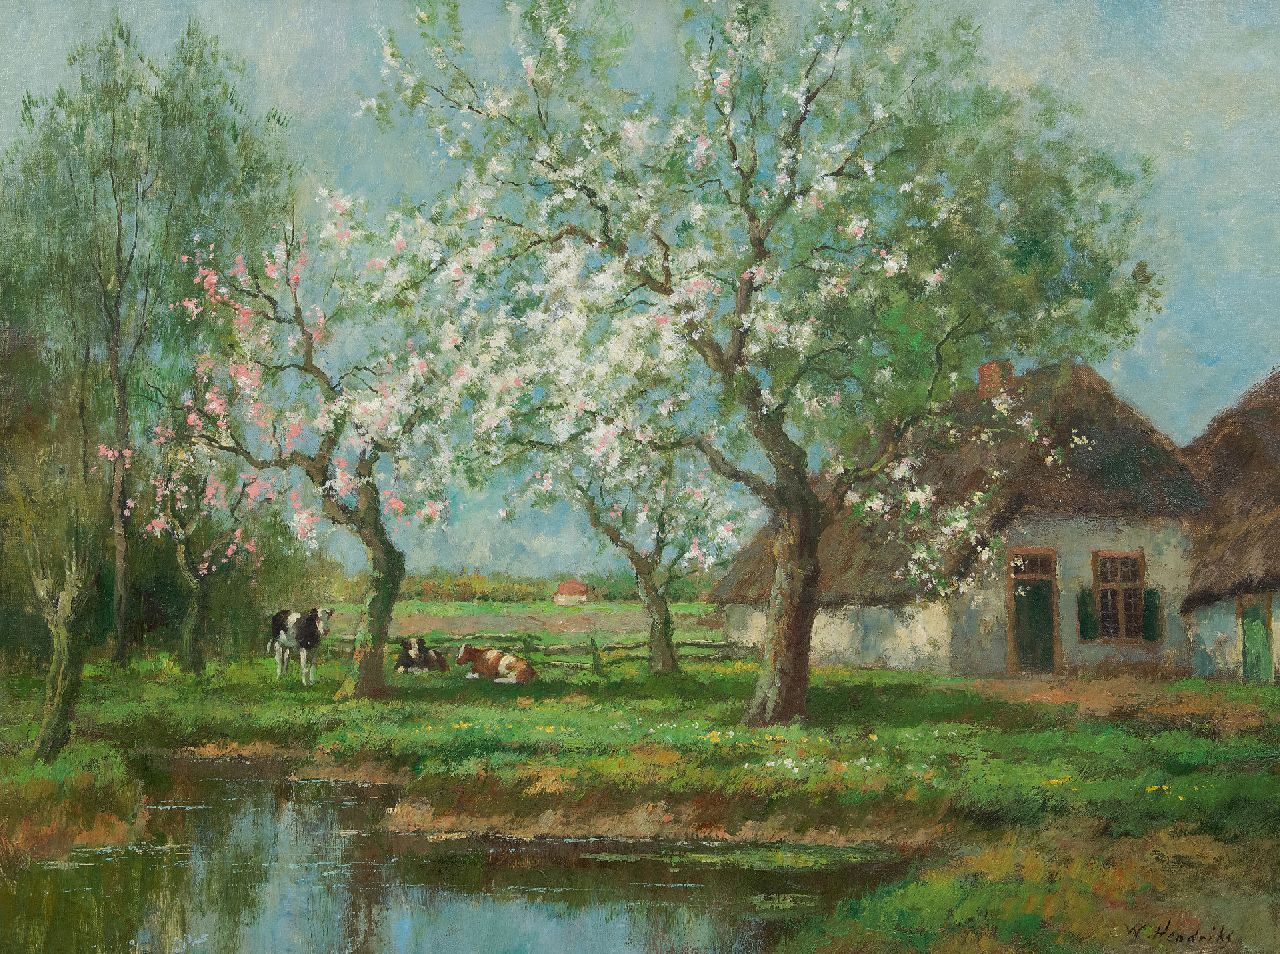 Bouter C.W.  | Cornelis Wouter 'Cor' Bouter | Paintings offered for sale | Farmyard in spring, oil on canvas 61.0 x 81.6 cm, signed l.r. 'W. Hendriks' (pseudonym)